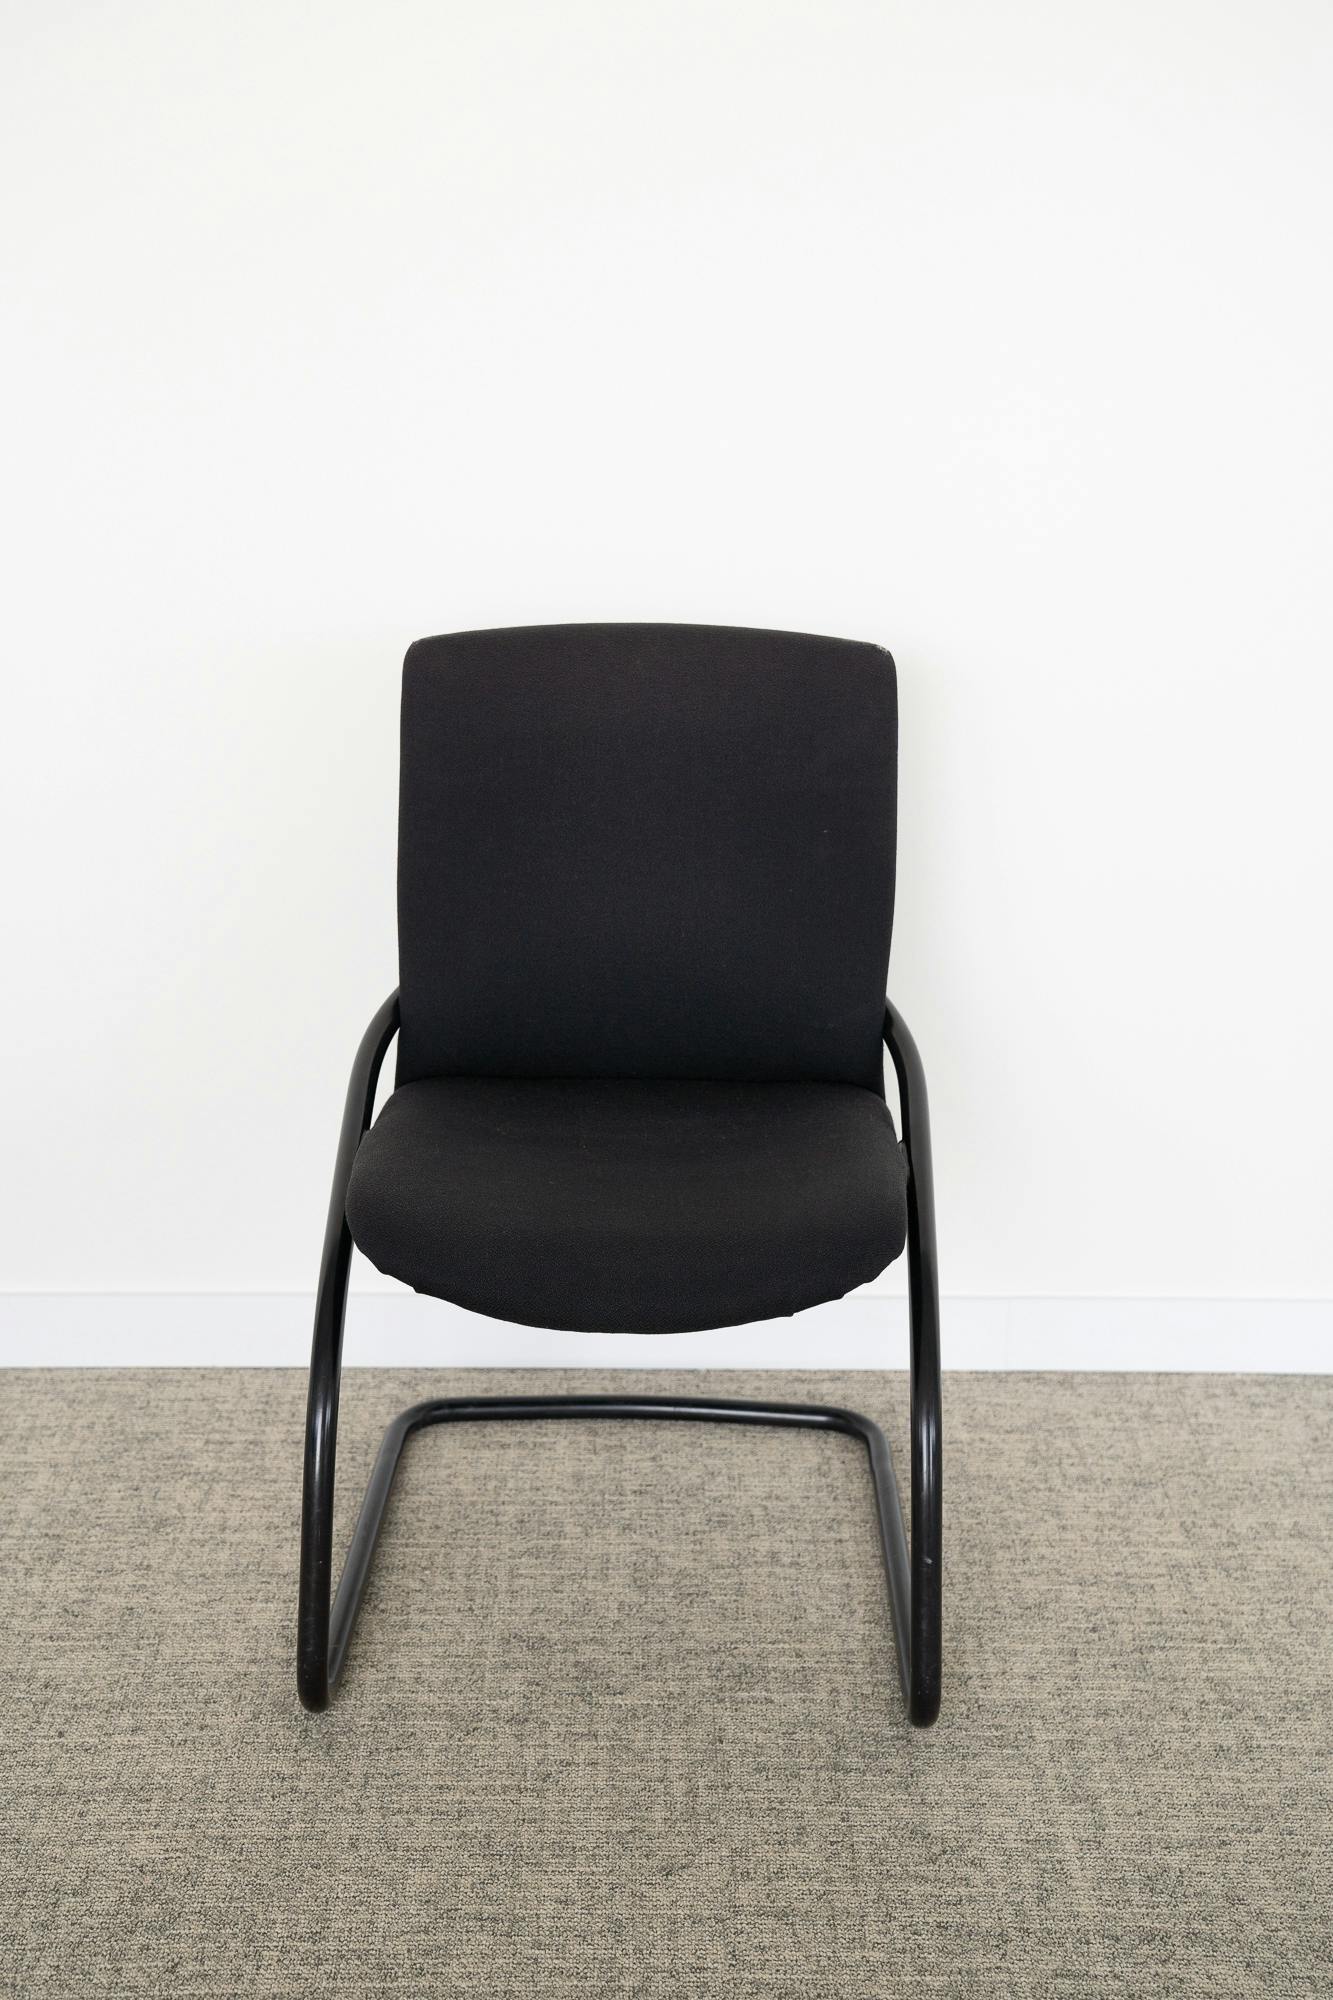 black meeting chair  - Second hand quality "Chairs" - Relieve Furniture